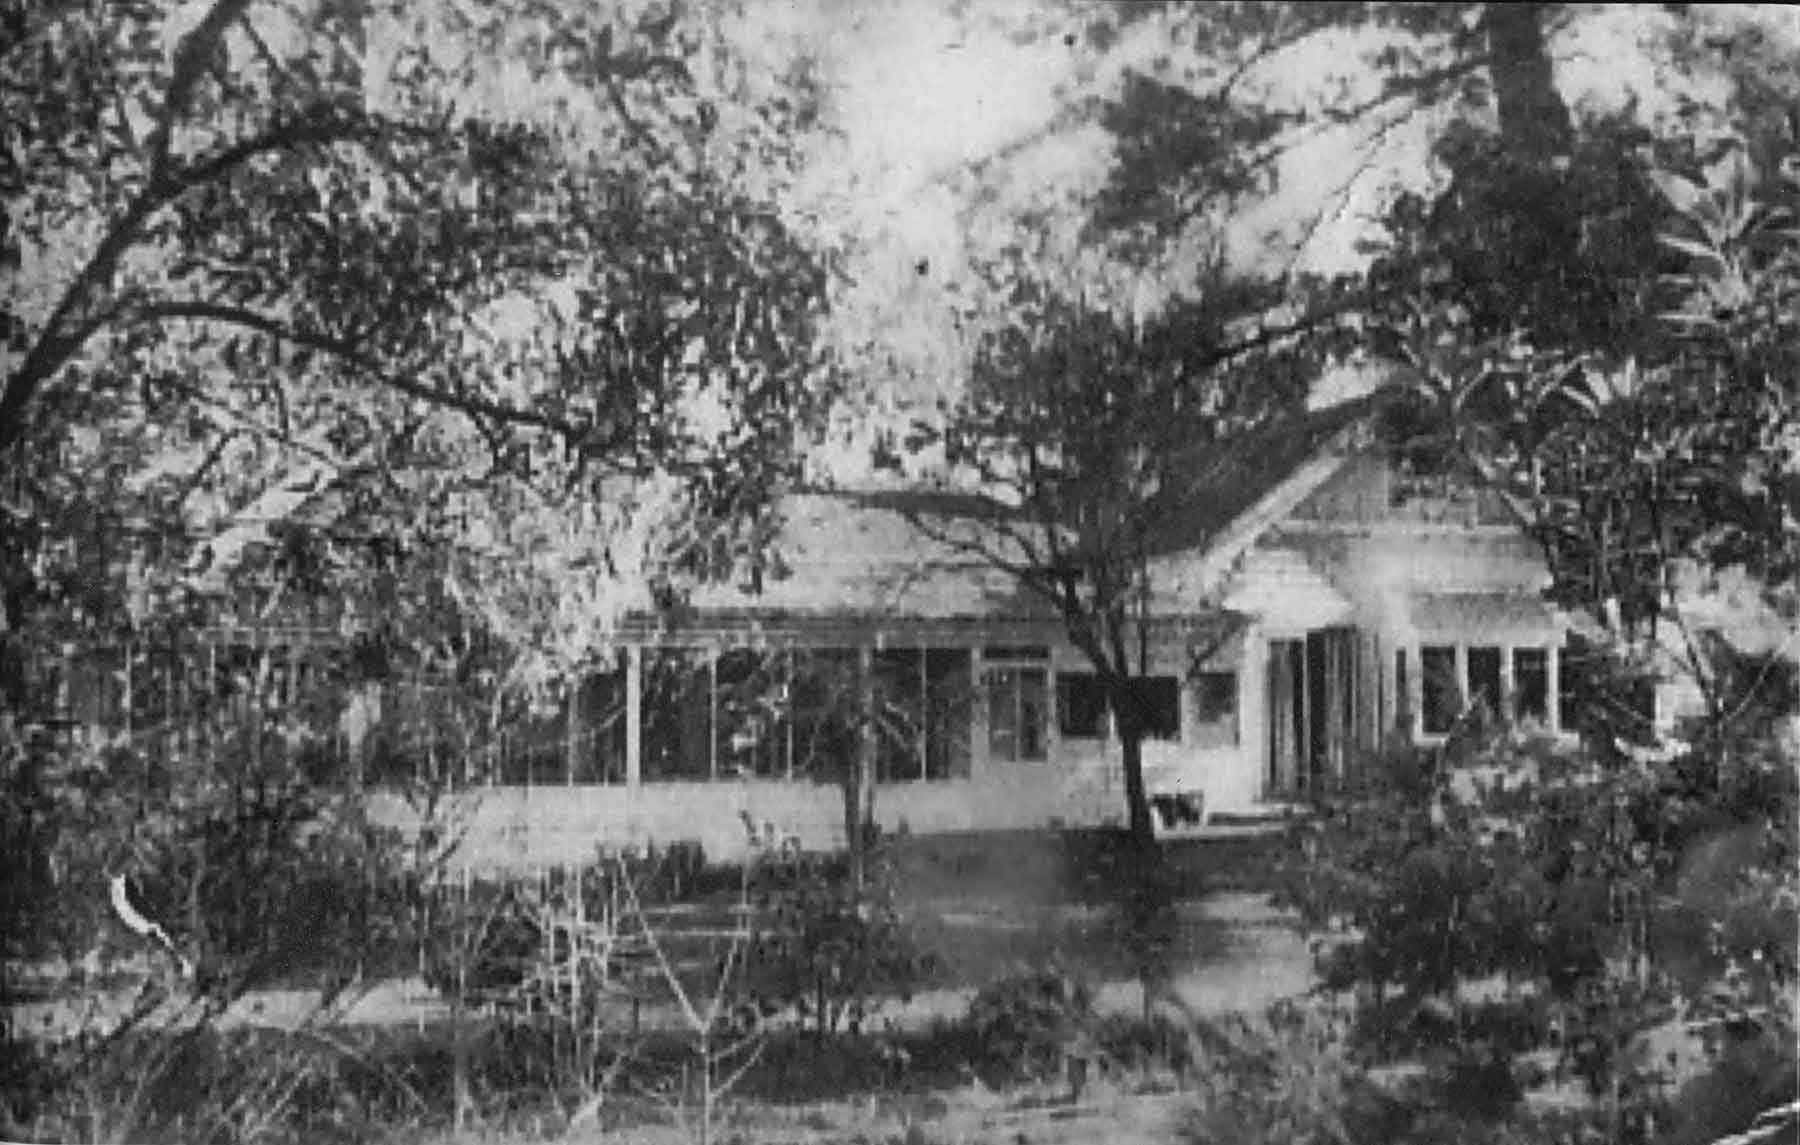 Pine Trees in 1952 - side view of the main house